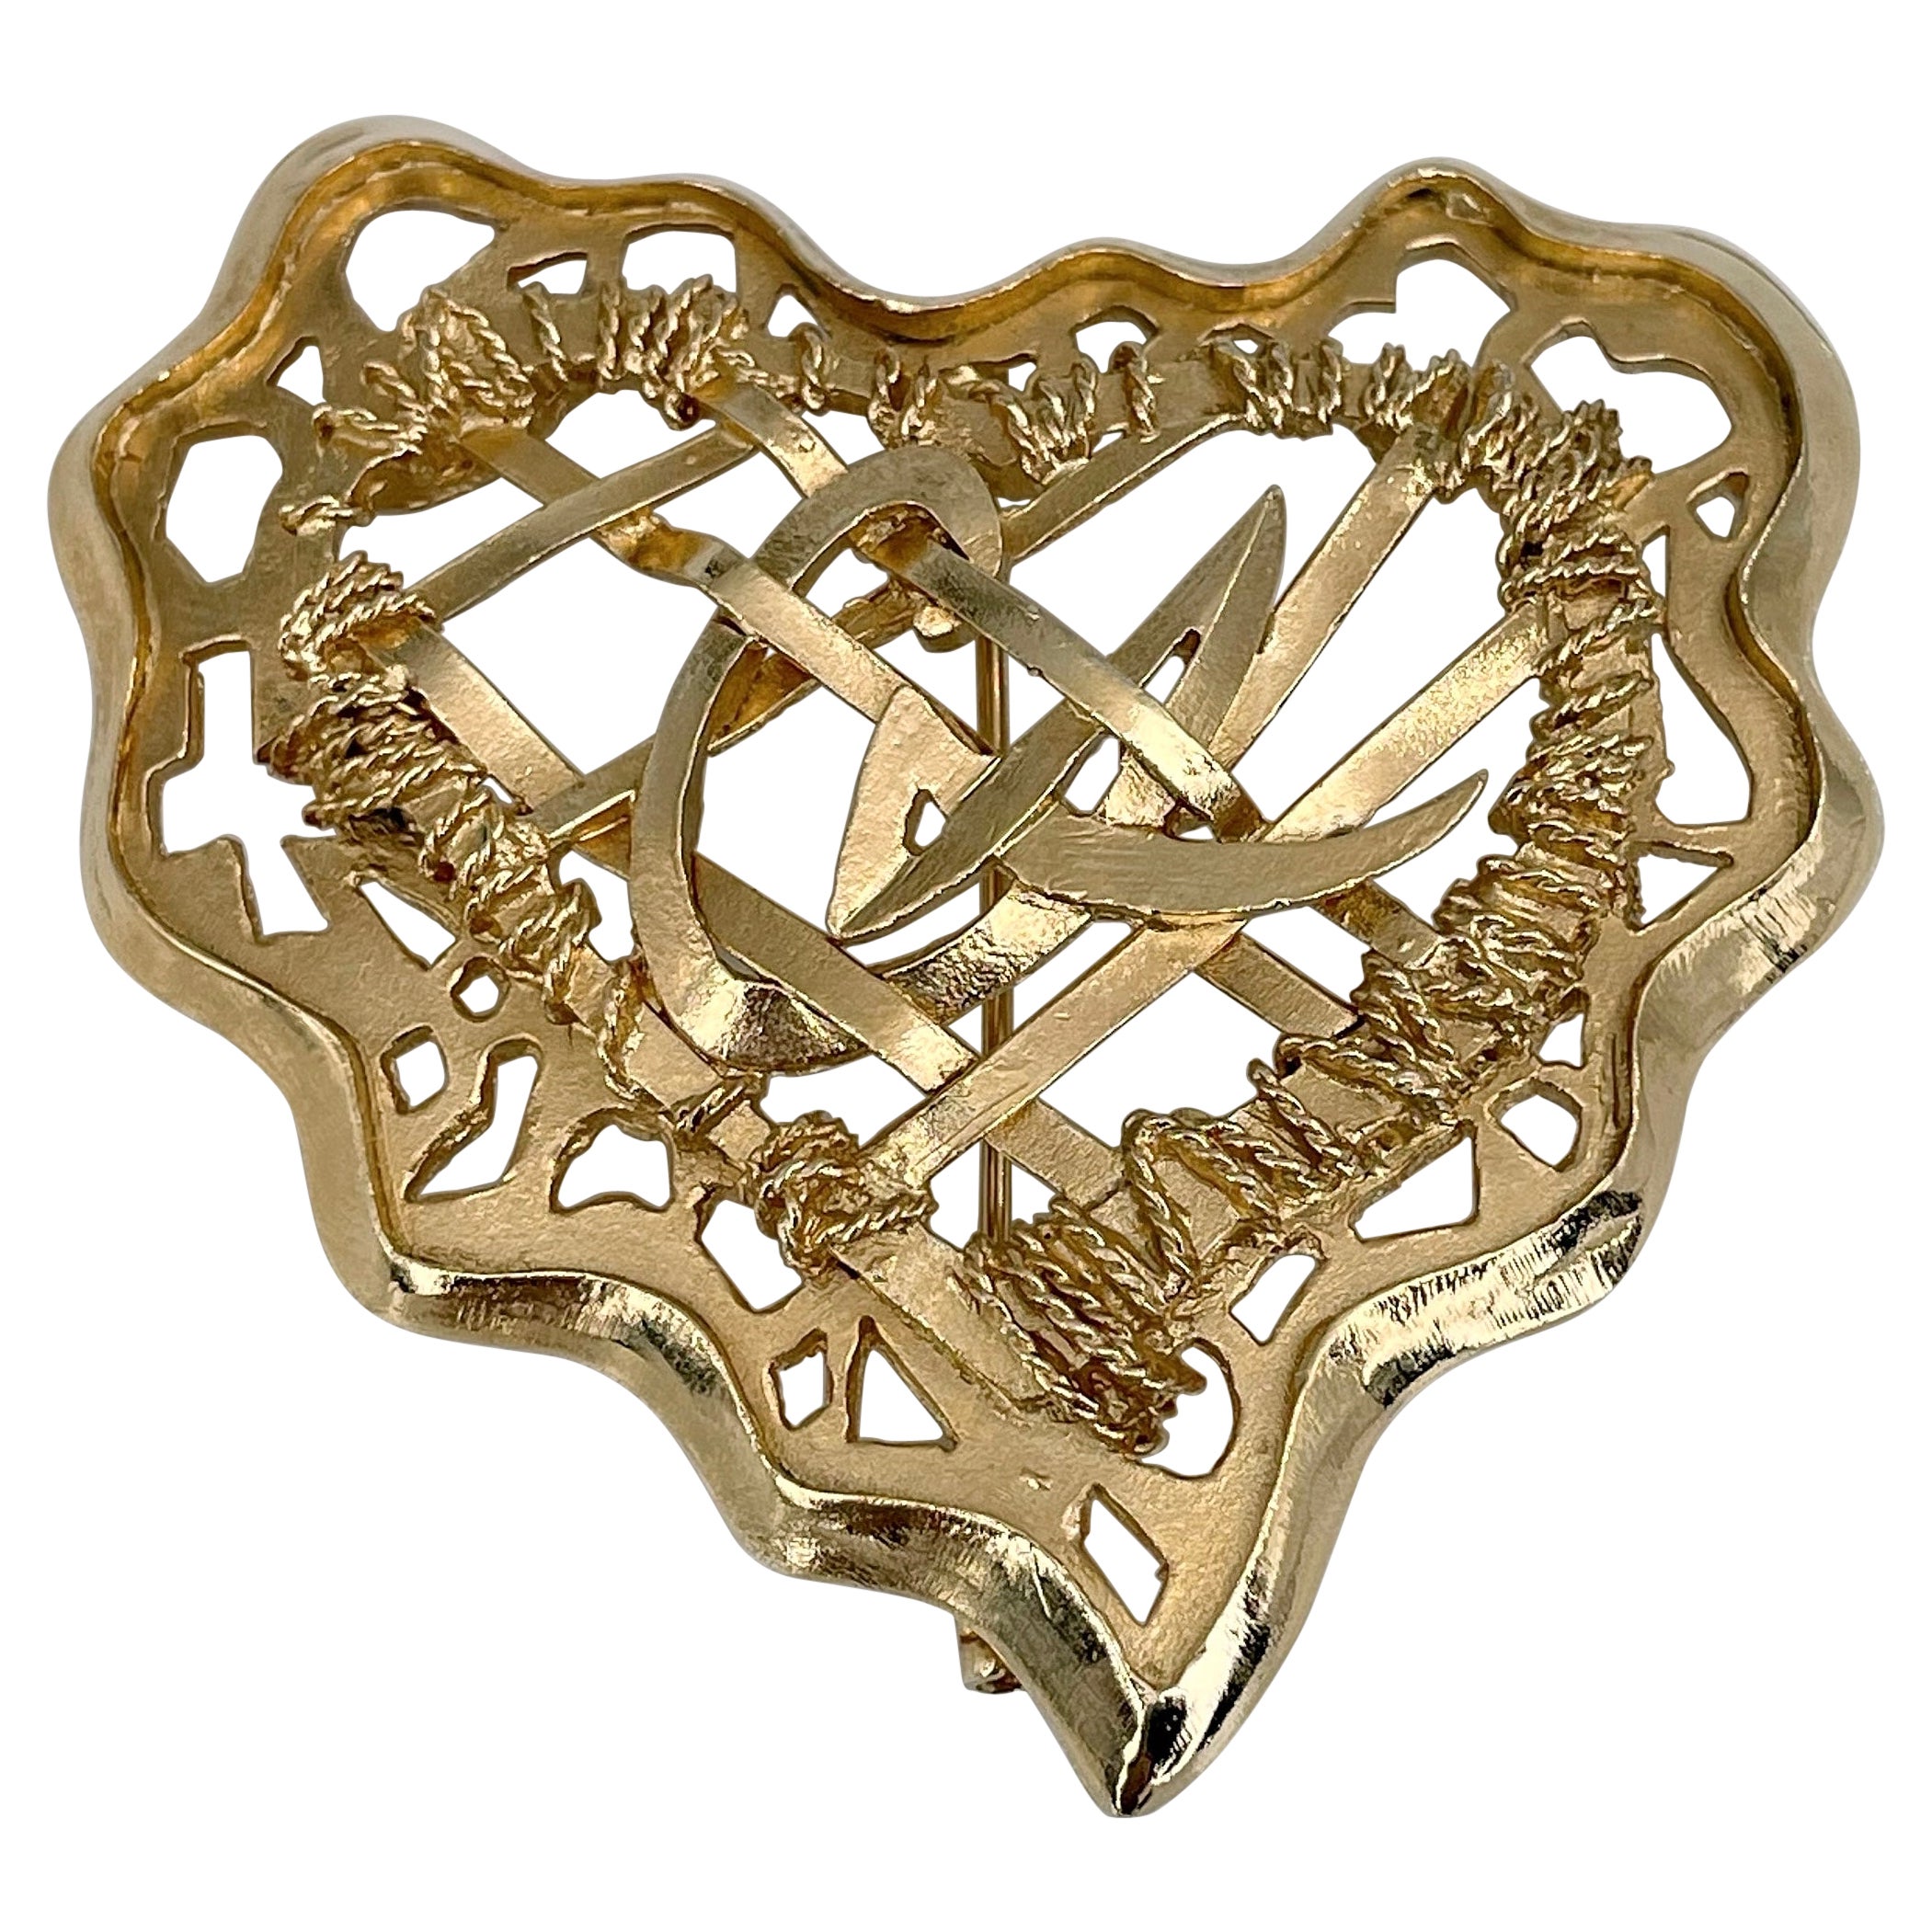 1990s Vintage Christian Lacroix Gold Tone Openwork Design CL Heart Pin Brooch For Sale